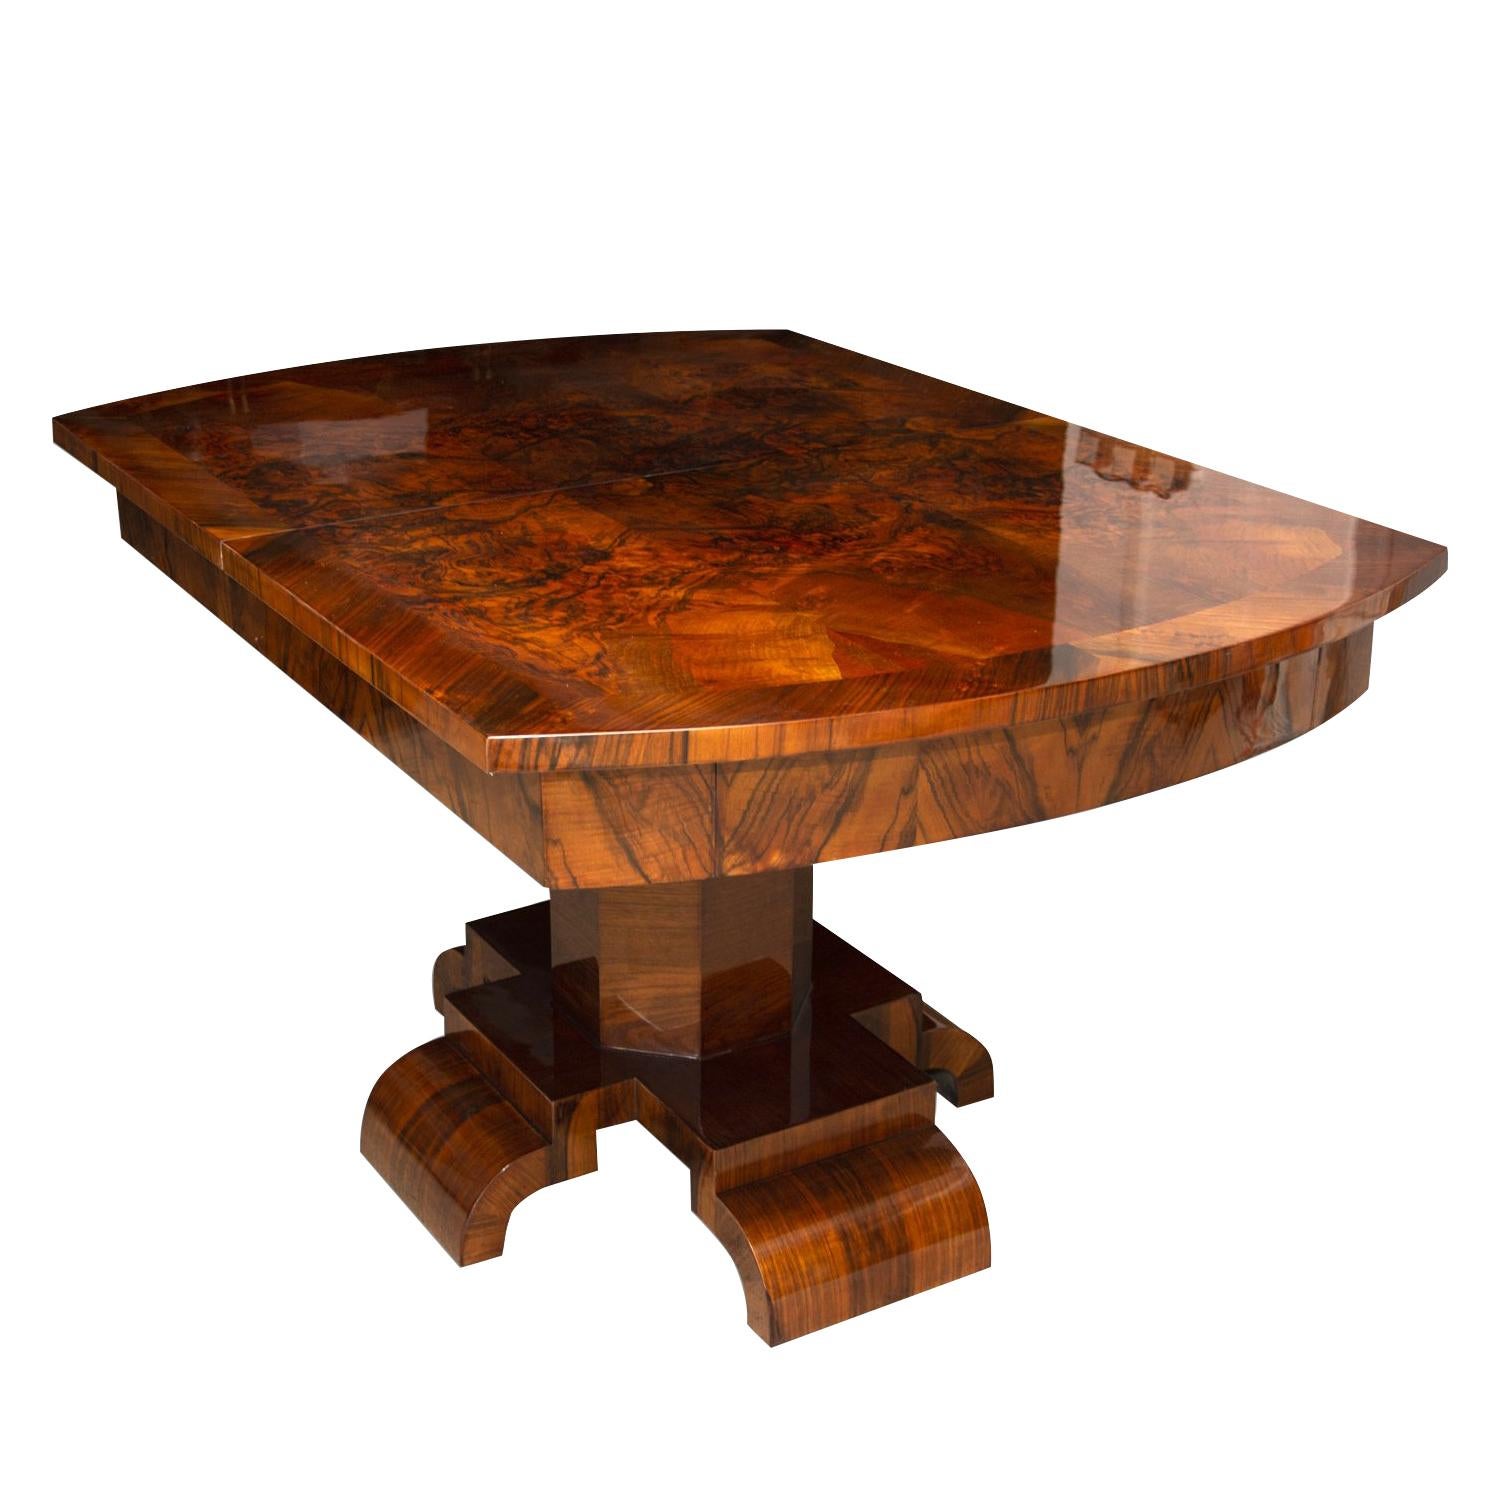 Art Deco Adjustable Dining Table in Walnut Veneer from the 1930s